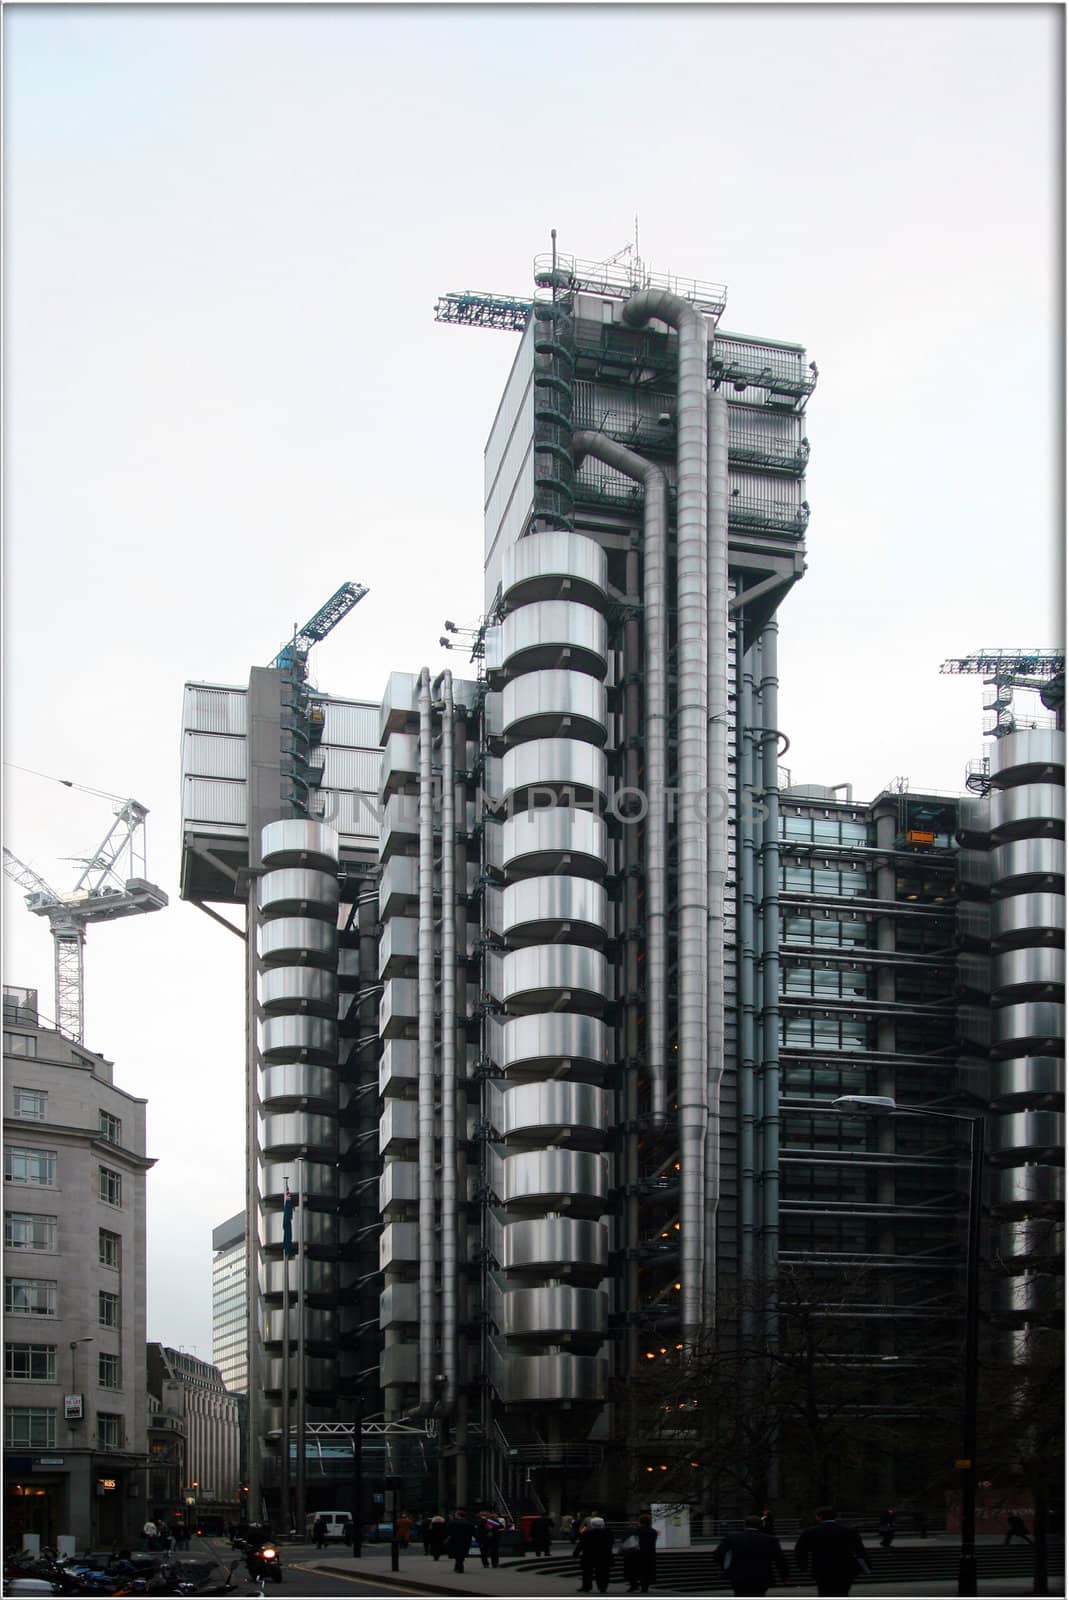 Modern building of the Lloyds of London